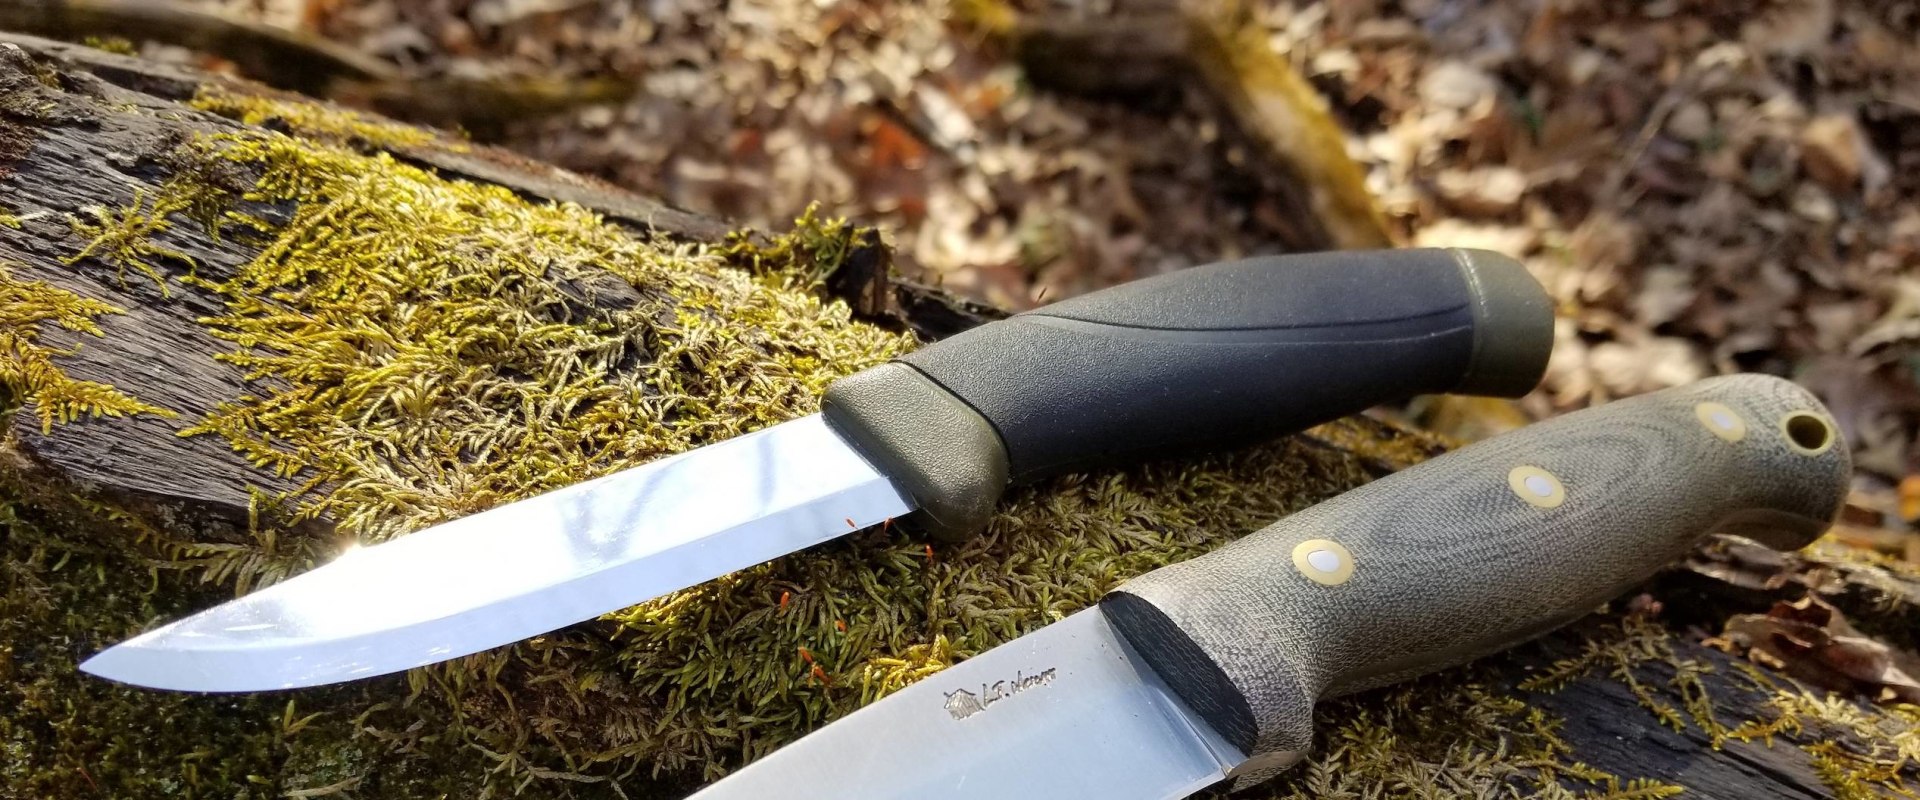 Where to Find the Finest Knives in the World?